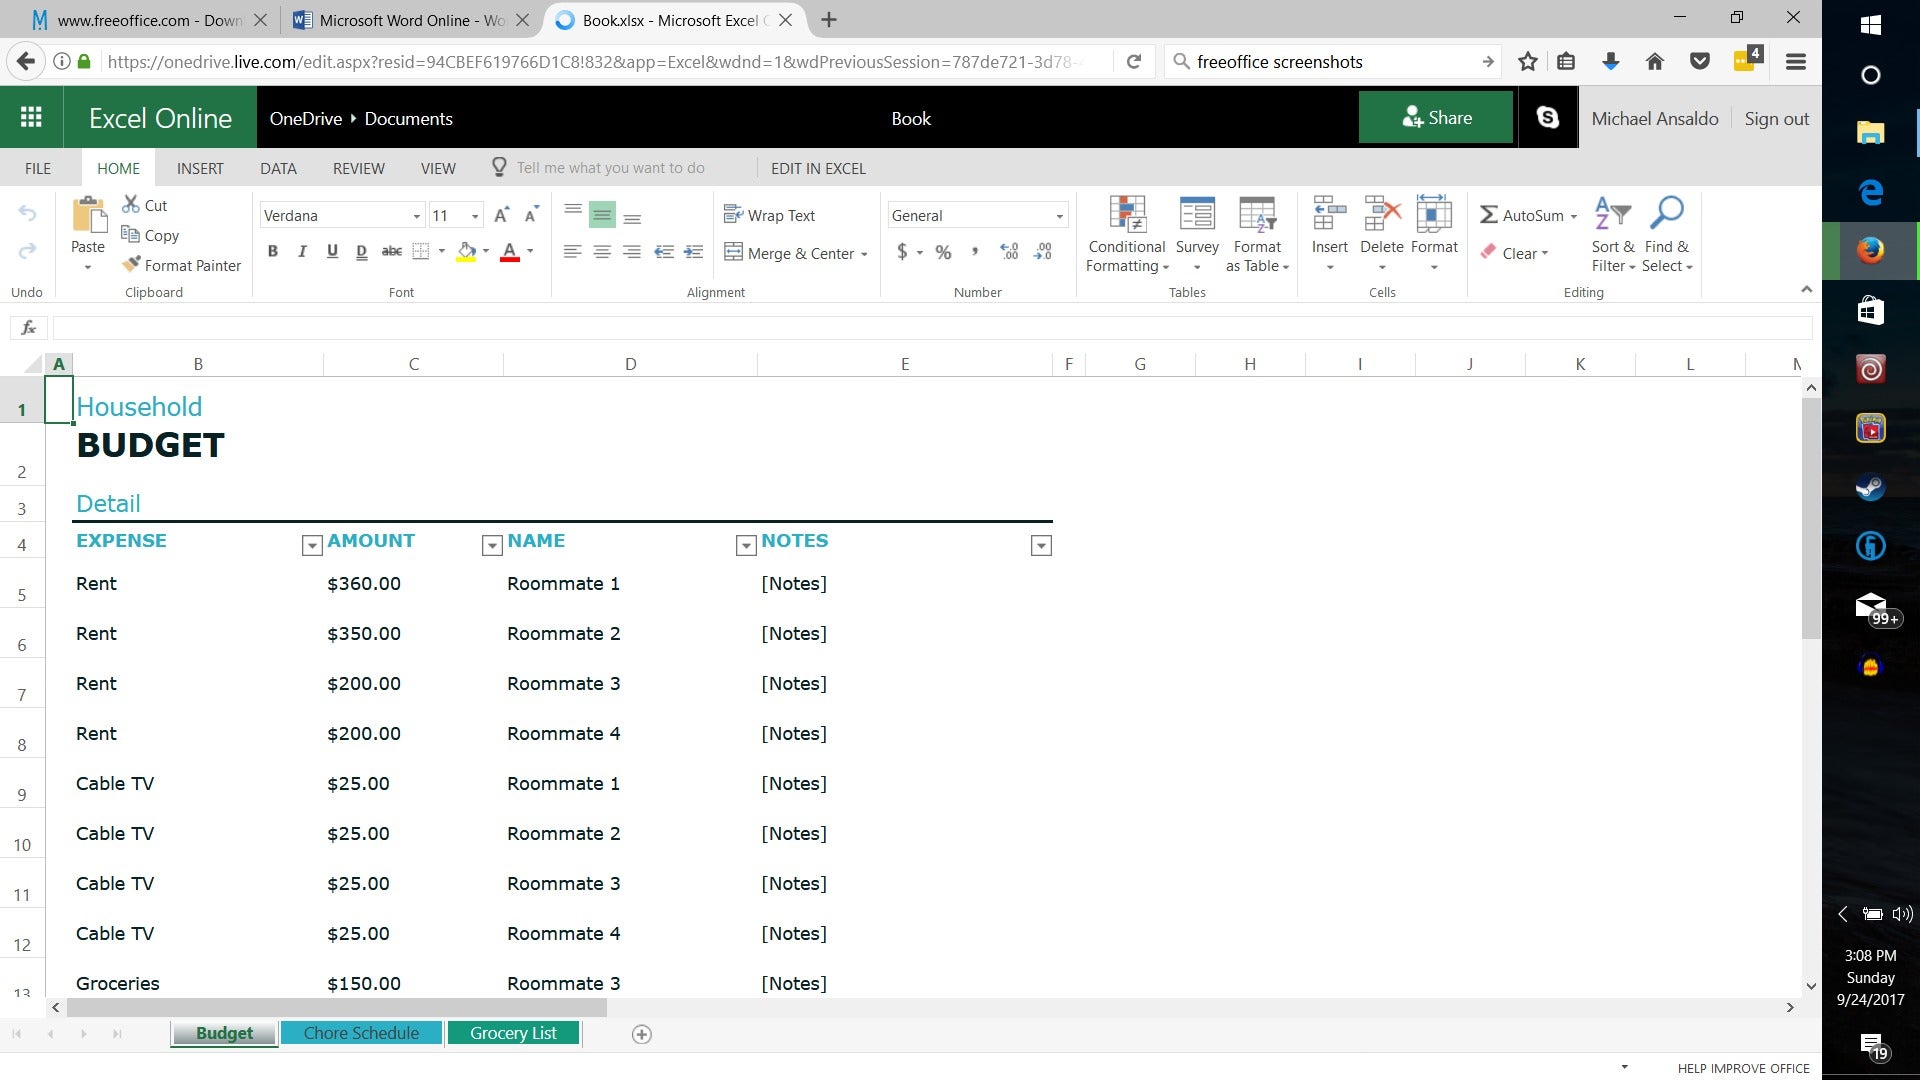 microsoft office excel free download for windows 10 64 bit